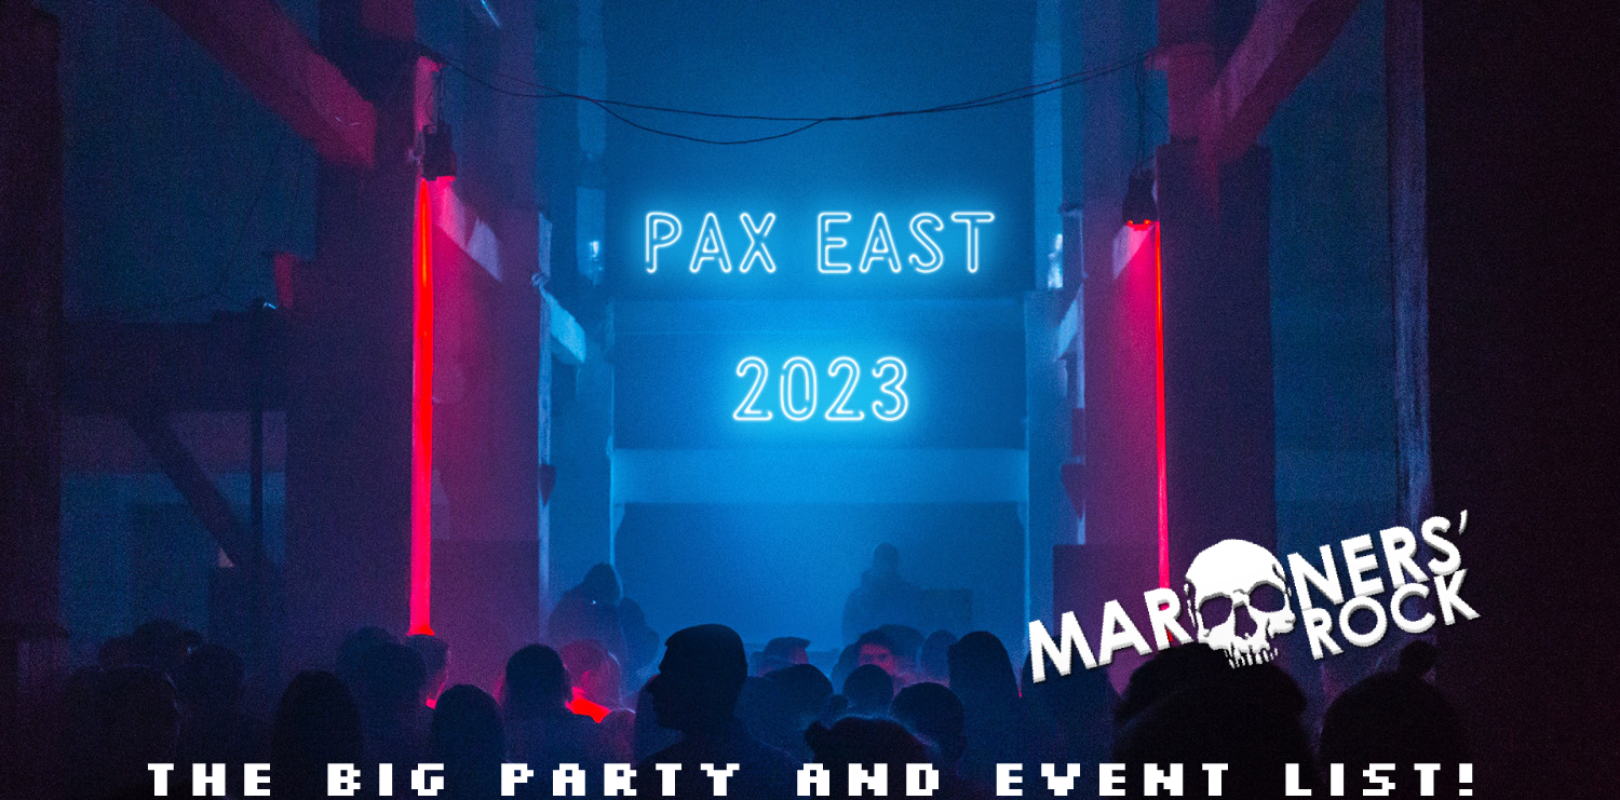 PAX East 2023 Party and Event List! Marooners' Rock